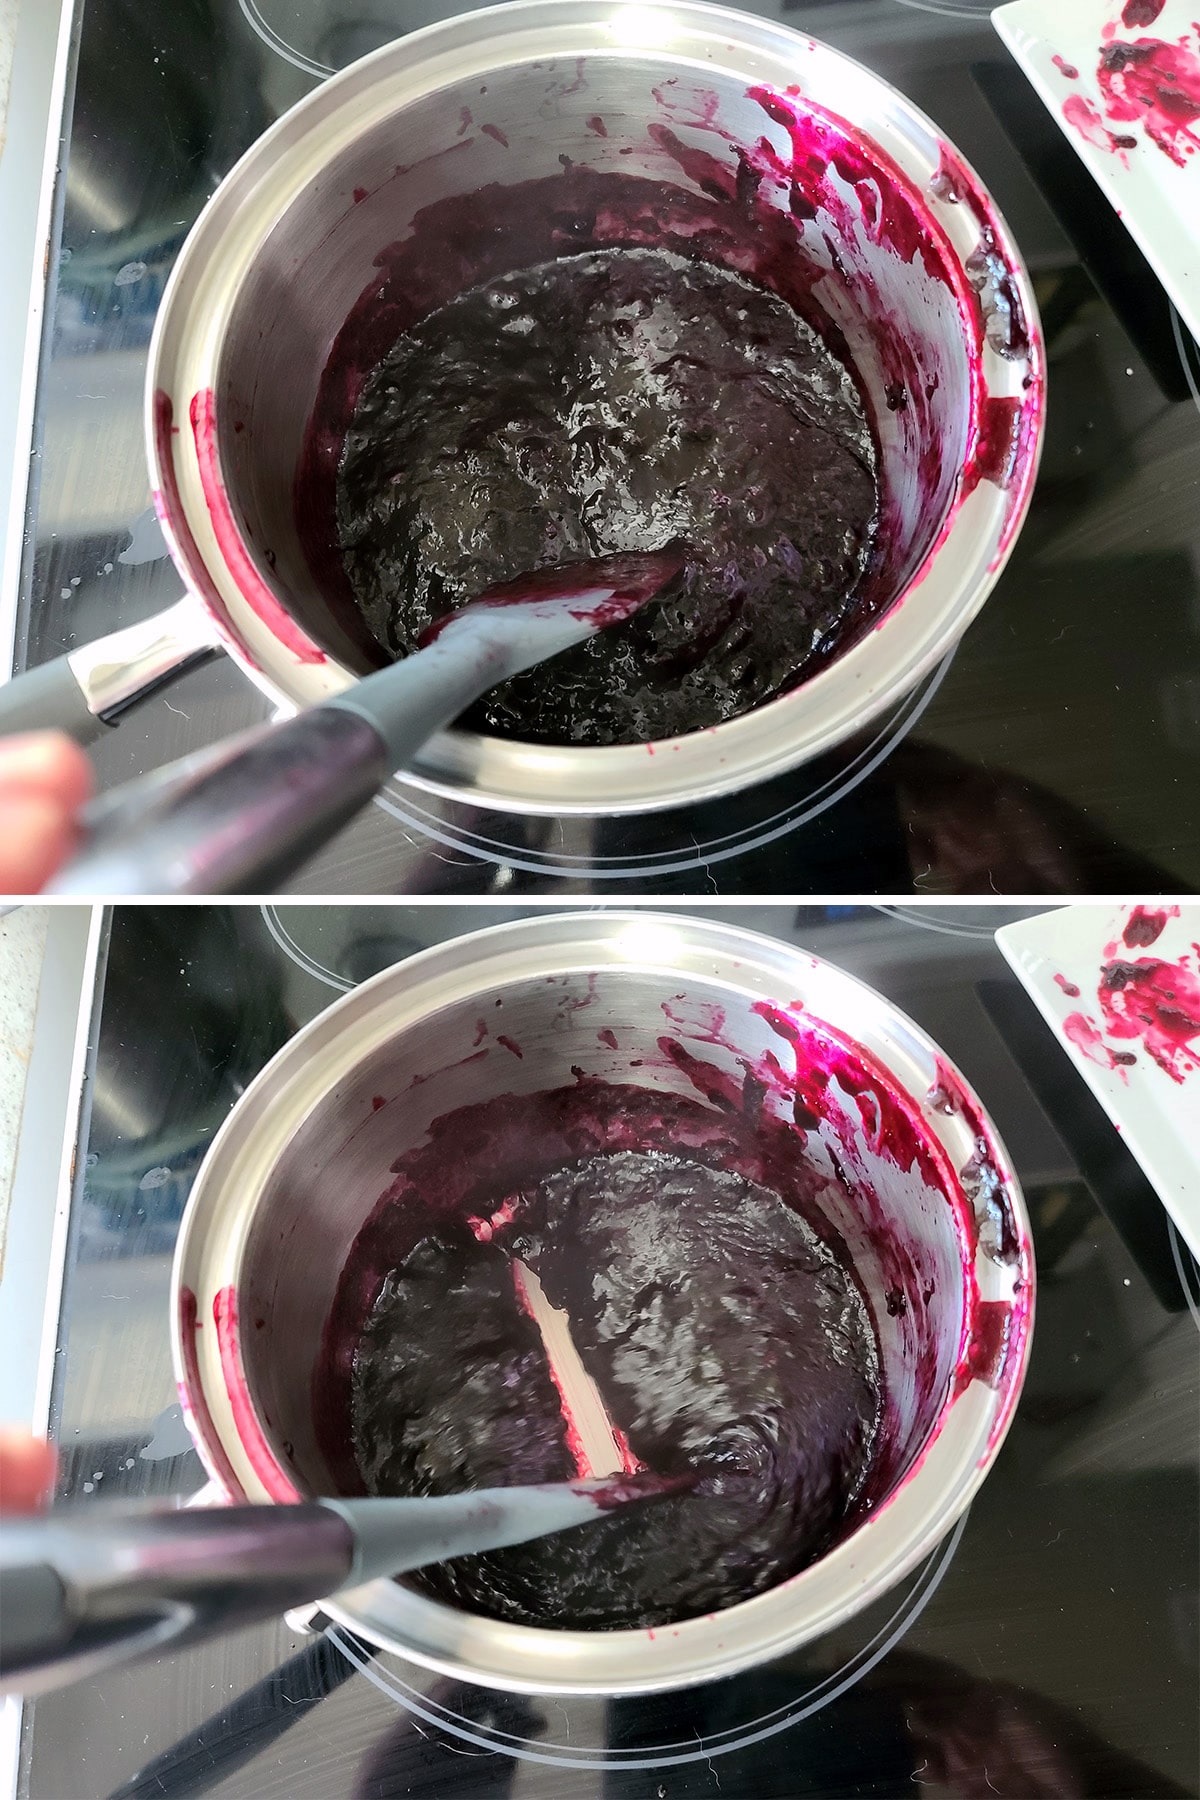 A two part image showing thickened blueberry jam, with a wake being traced through it.